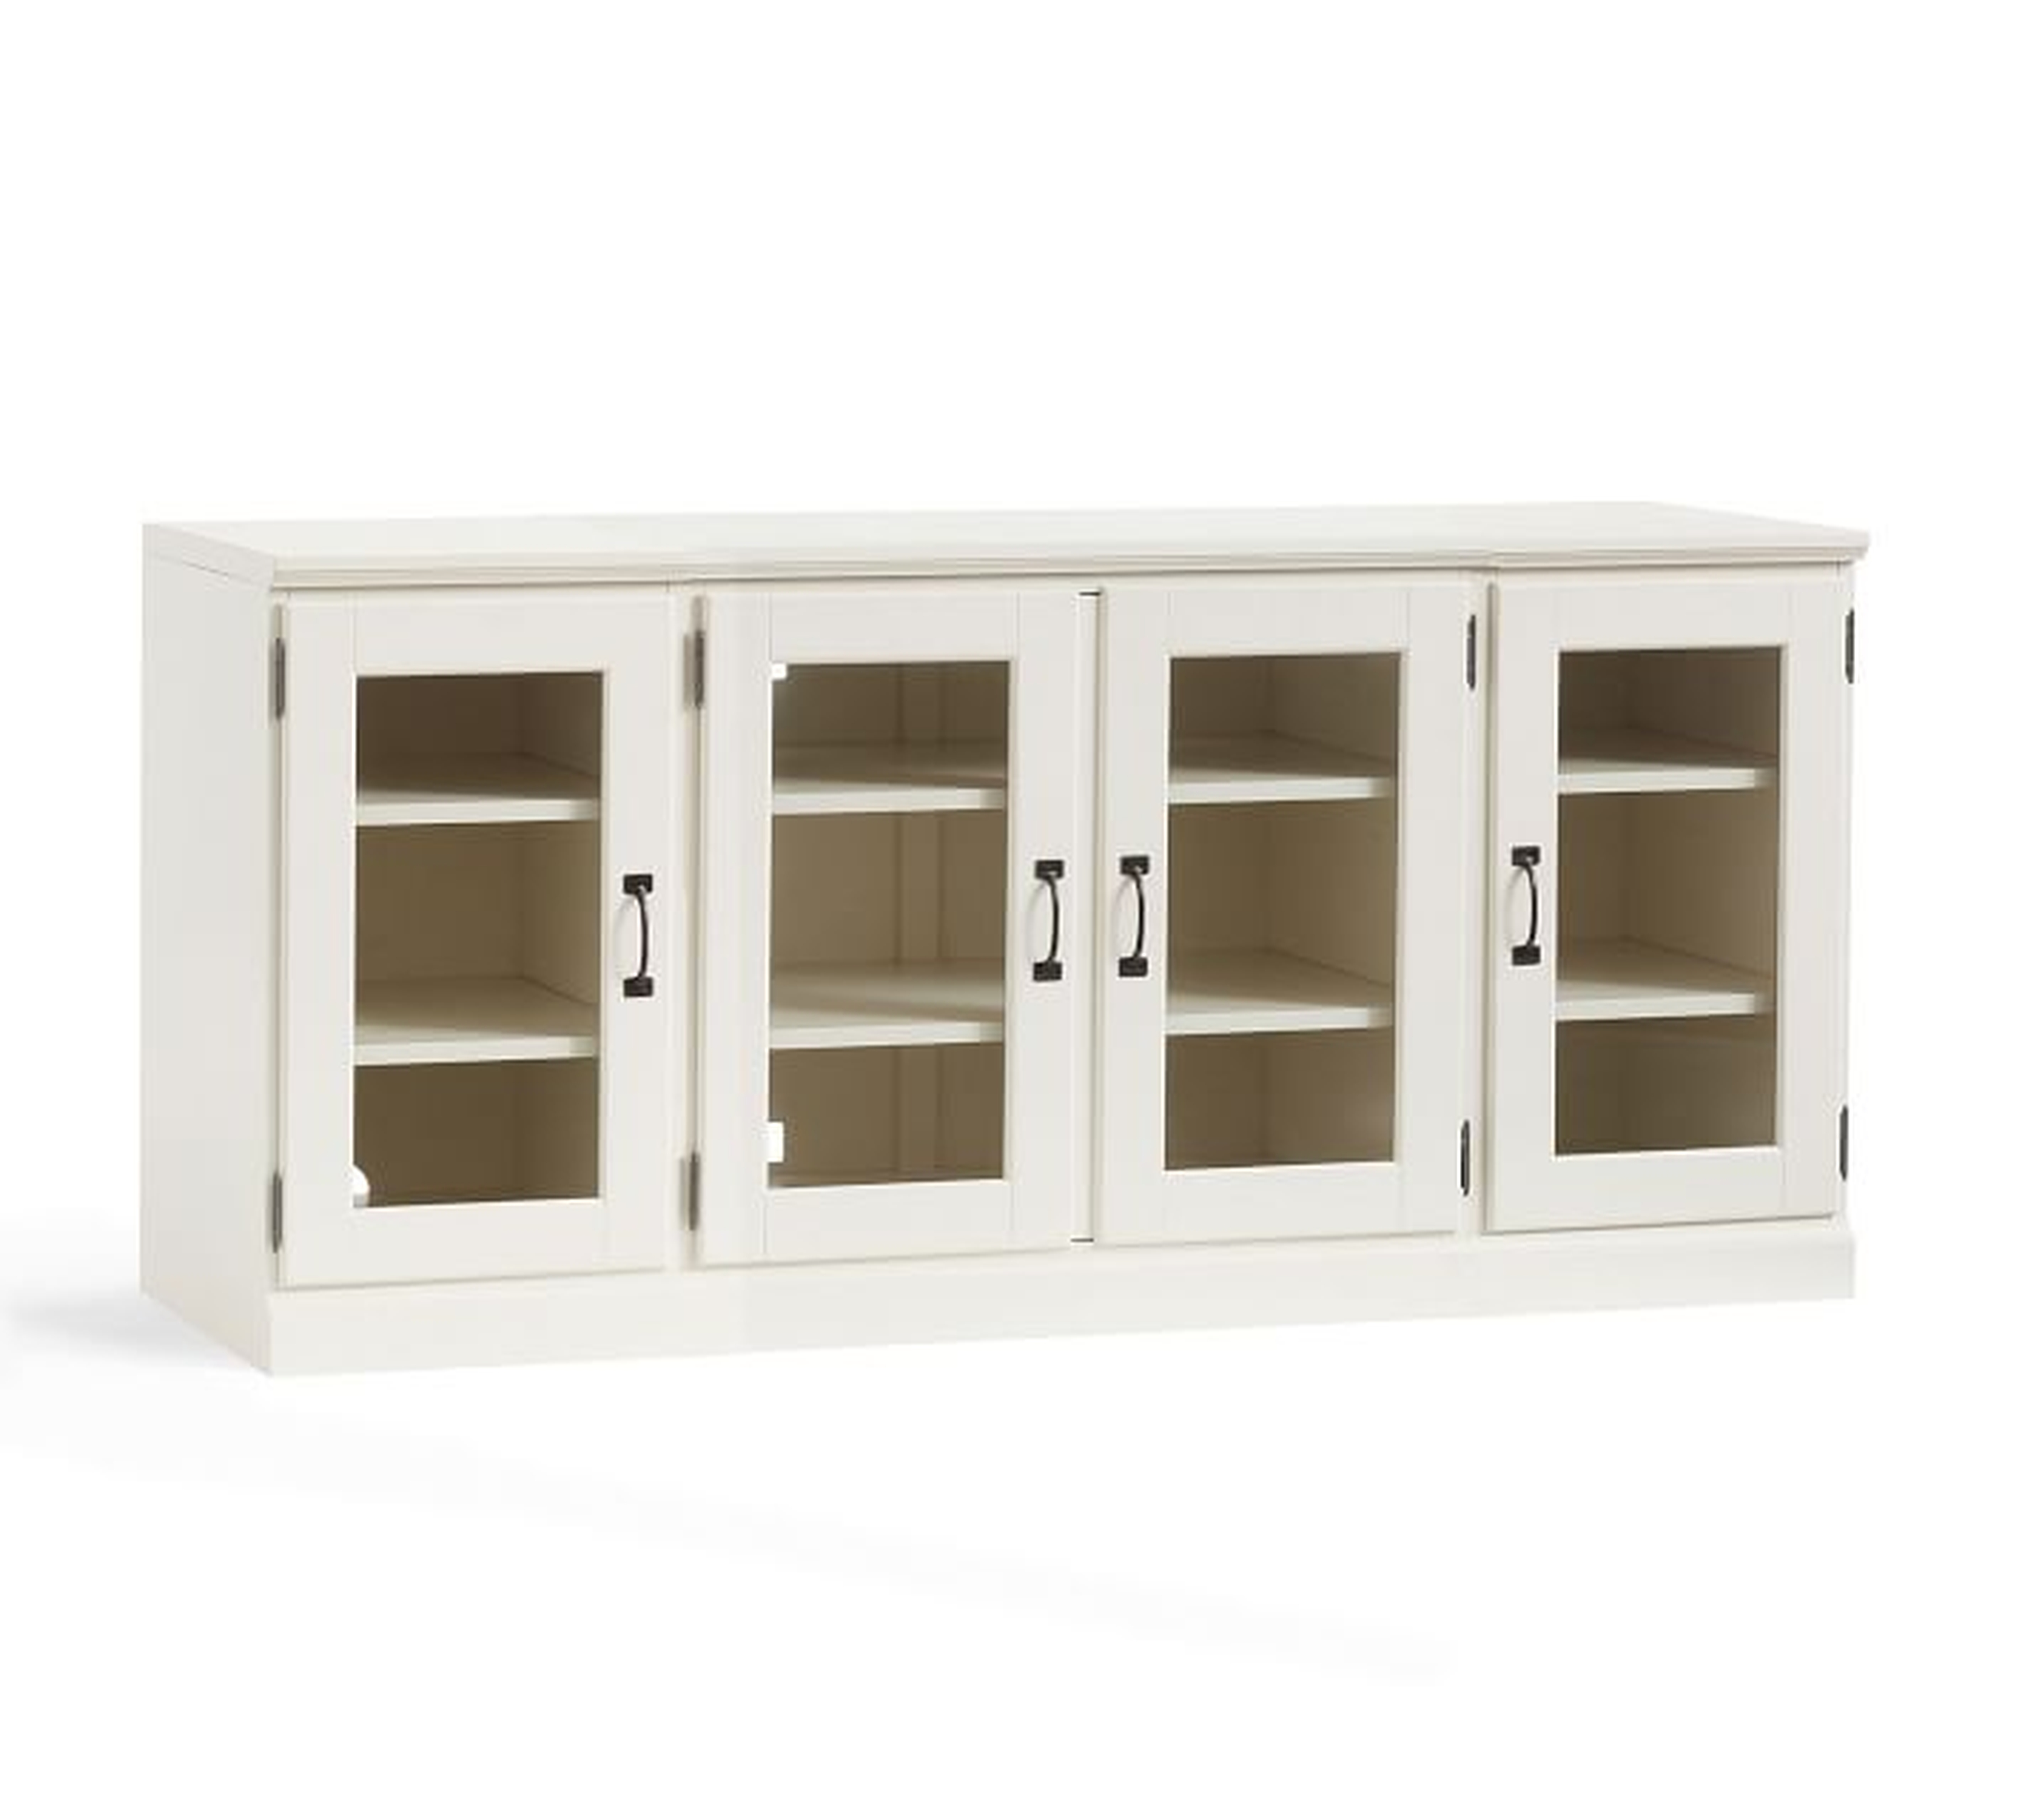 PRINTER'S LARGE LONG LOW MEDIA STAND SELECT FINISH: ARTISANAL WHITE GLASS CABINET - Pottery Barn